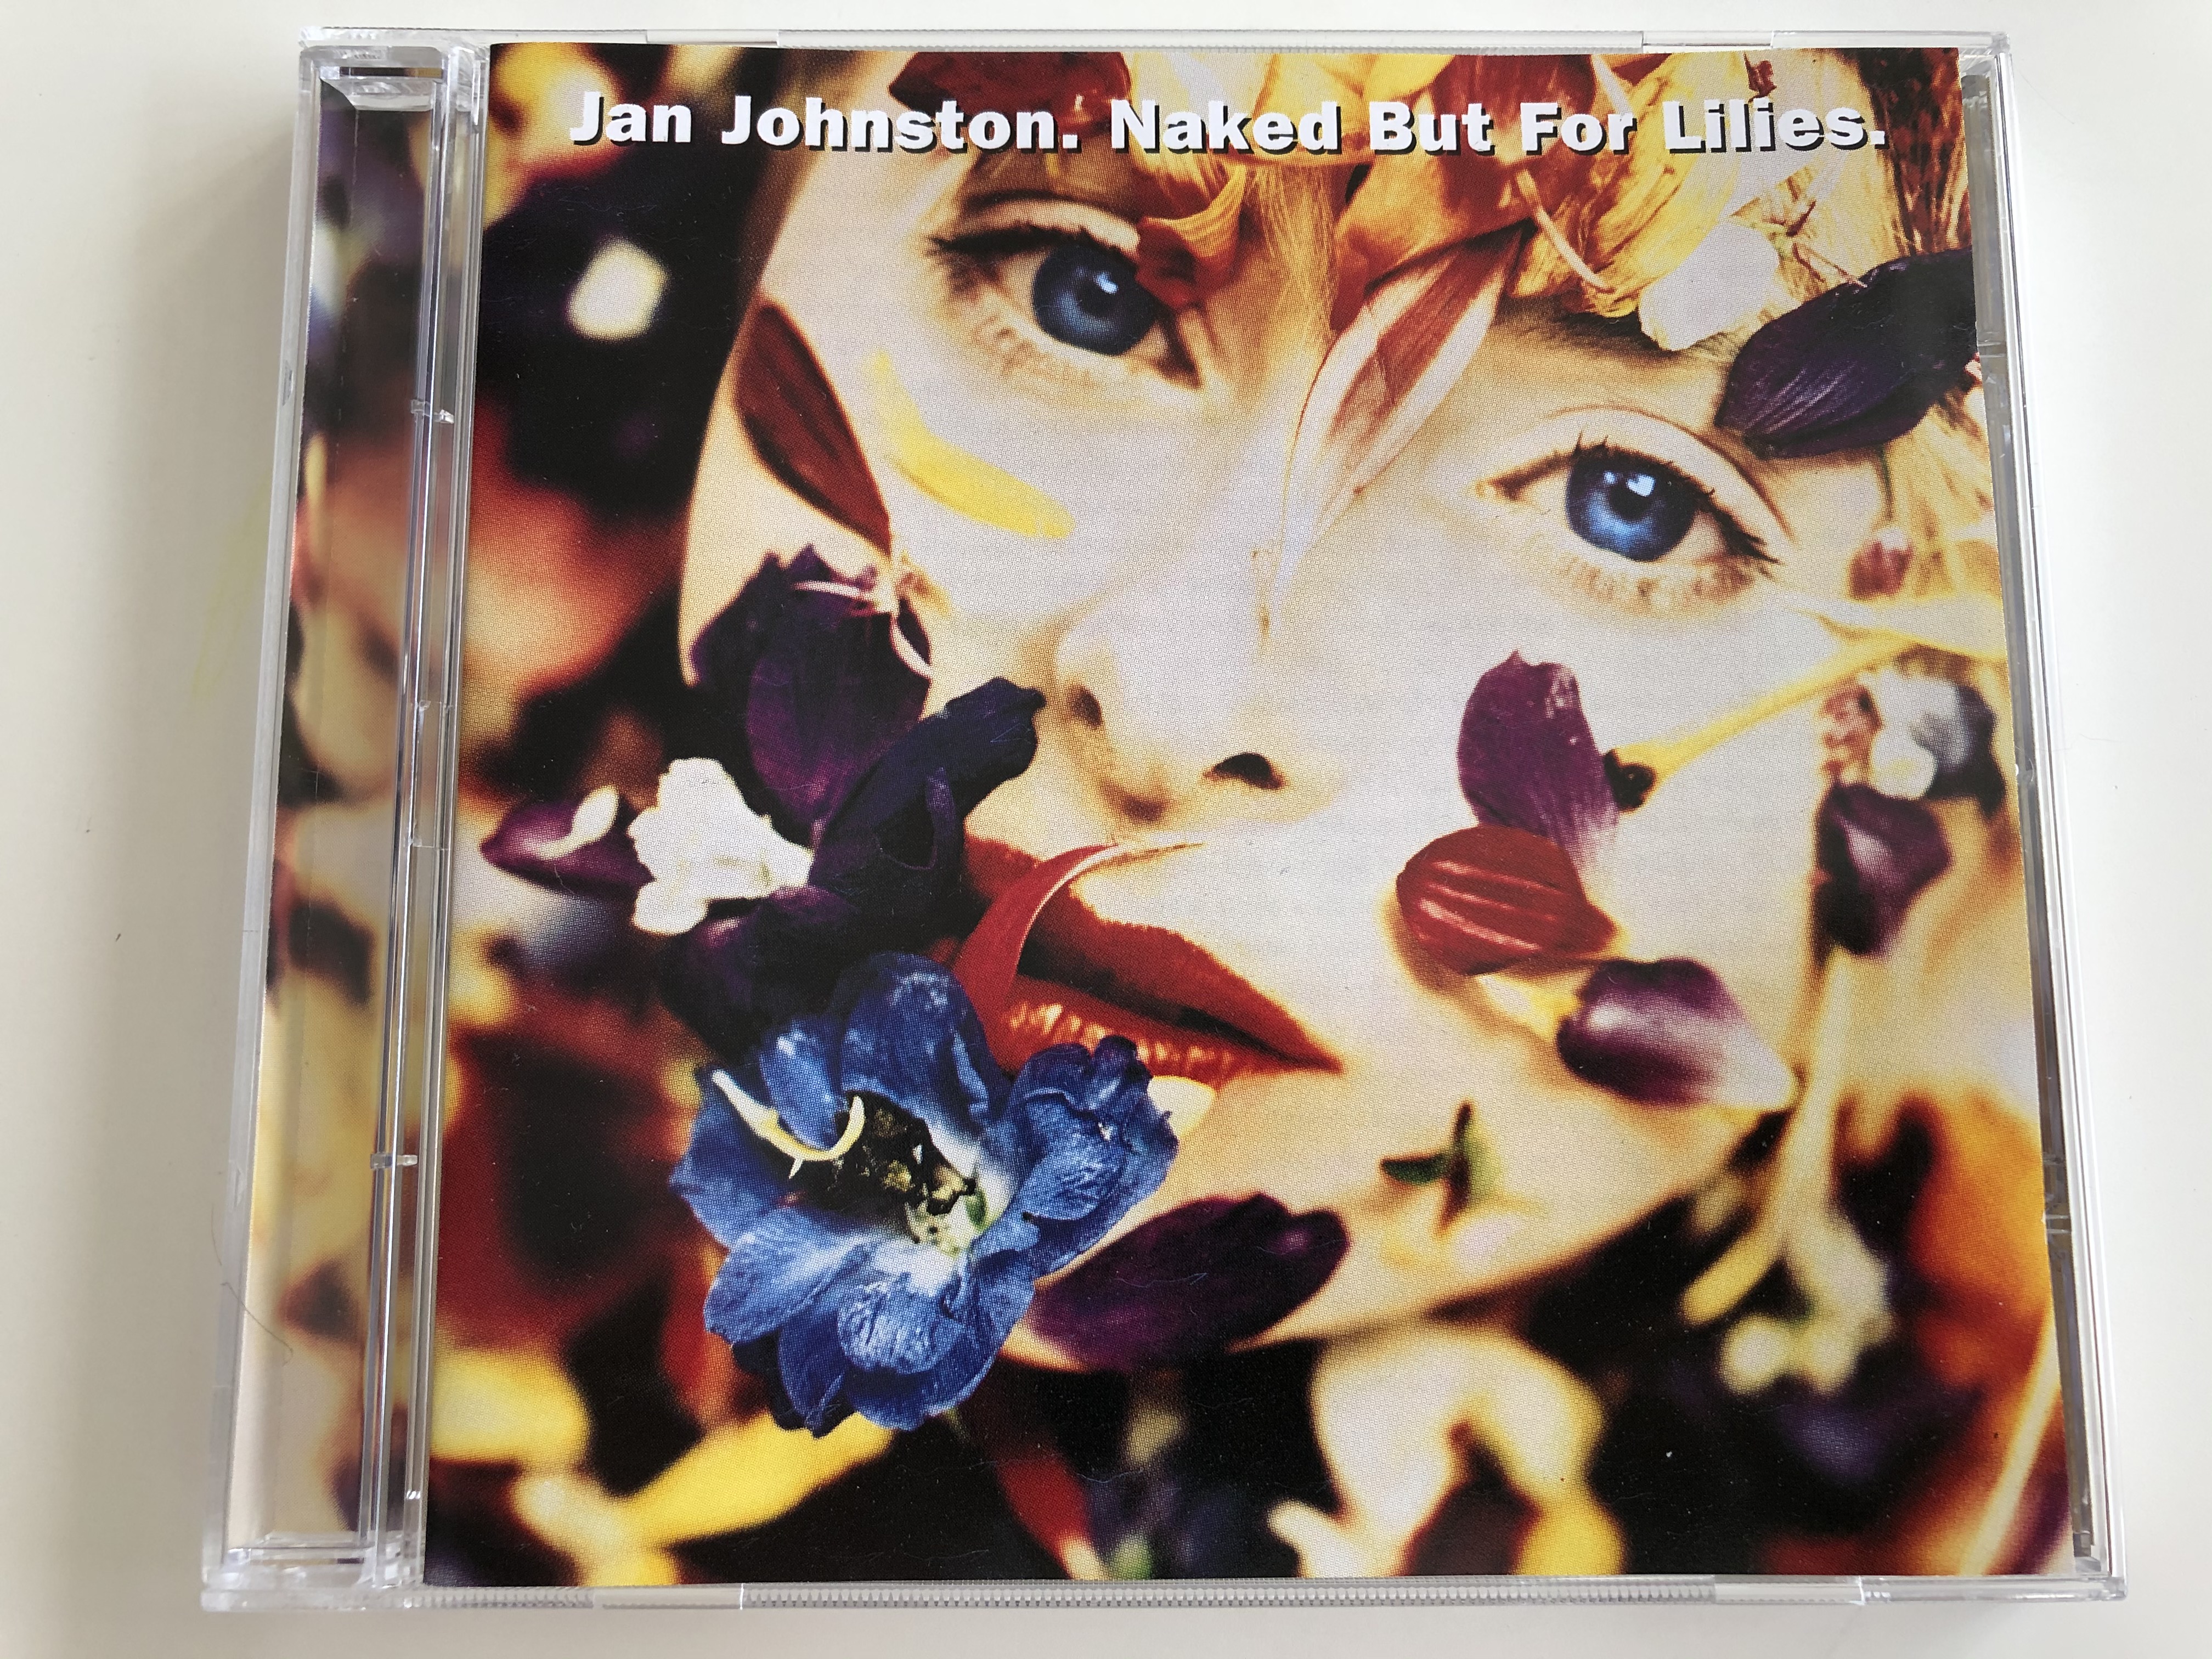 jan-johnston-naked-but-for-lilies.-a-m-records-audio-cd-1994-540-242-2-1-.jpg